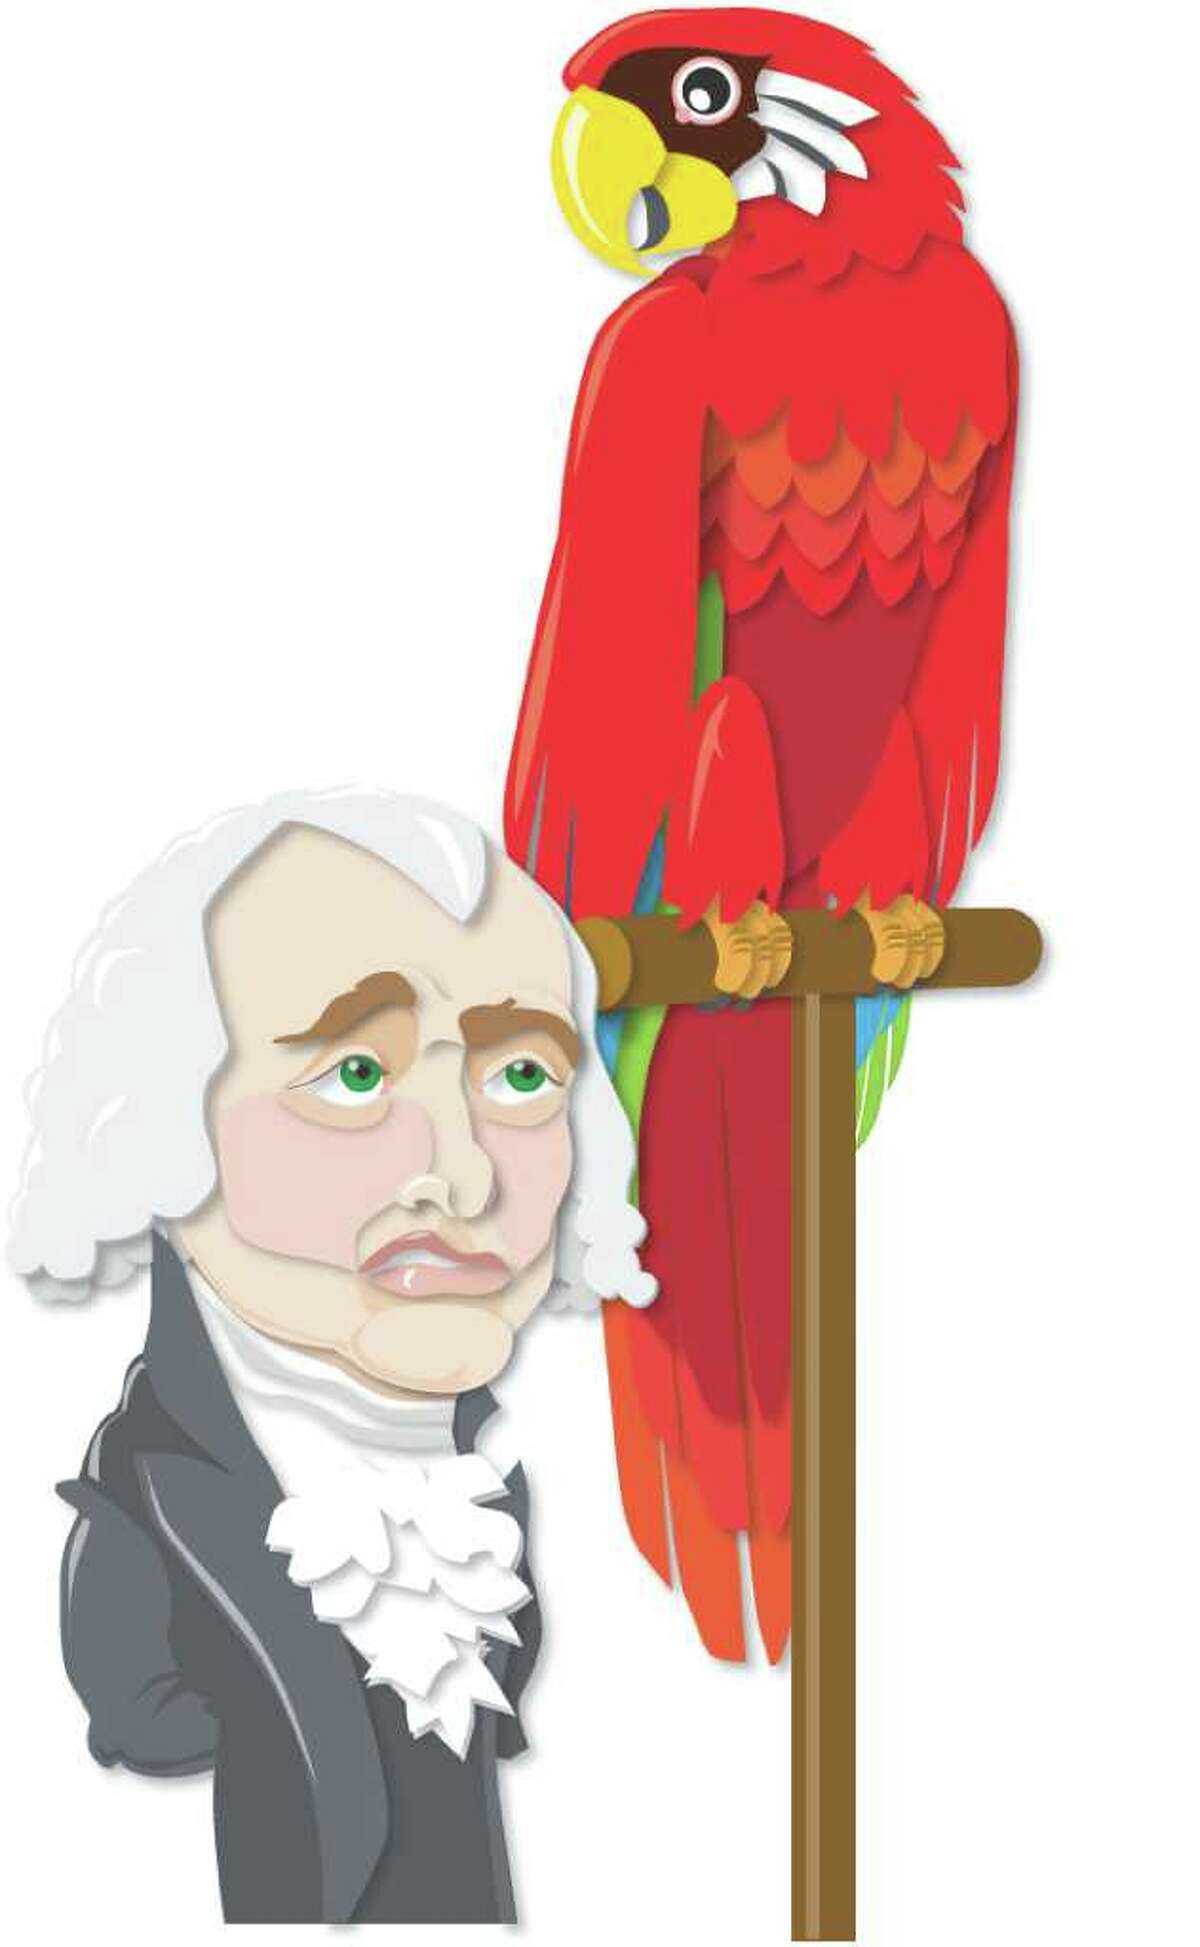 James Madison had a parrot.